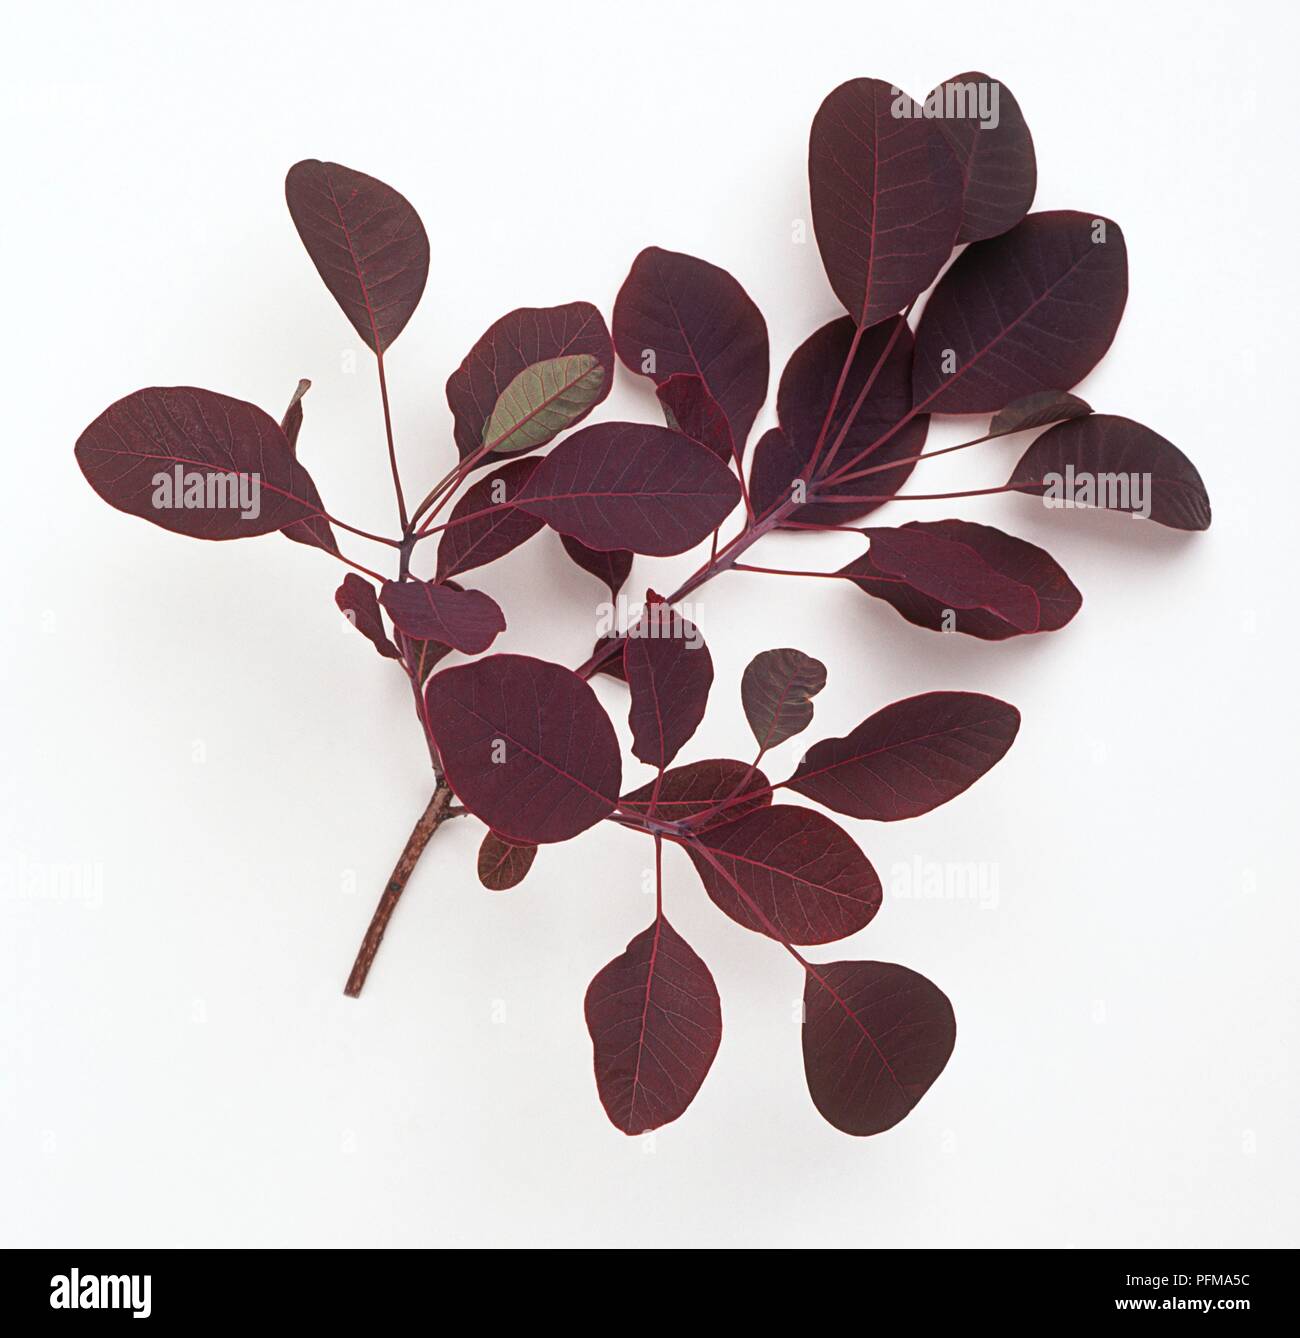 Cotinus coggygria 'Royal Purple' (Smoke Tree), rounded, deep red-purple leaves Stock Photo